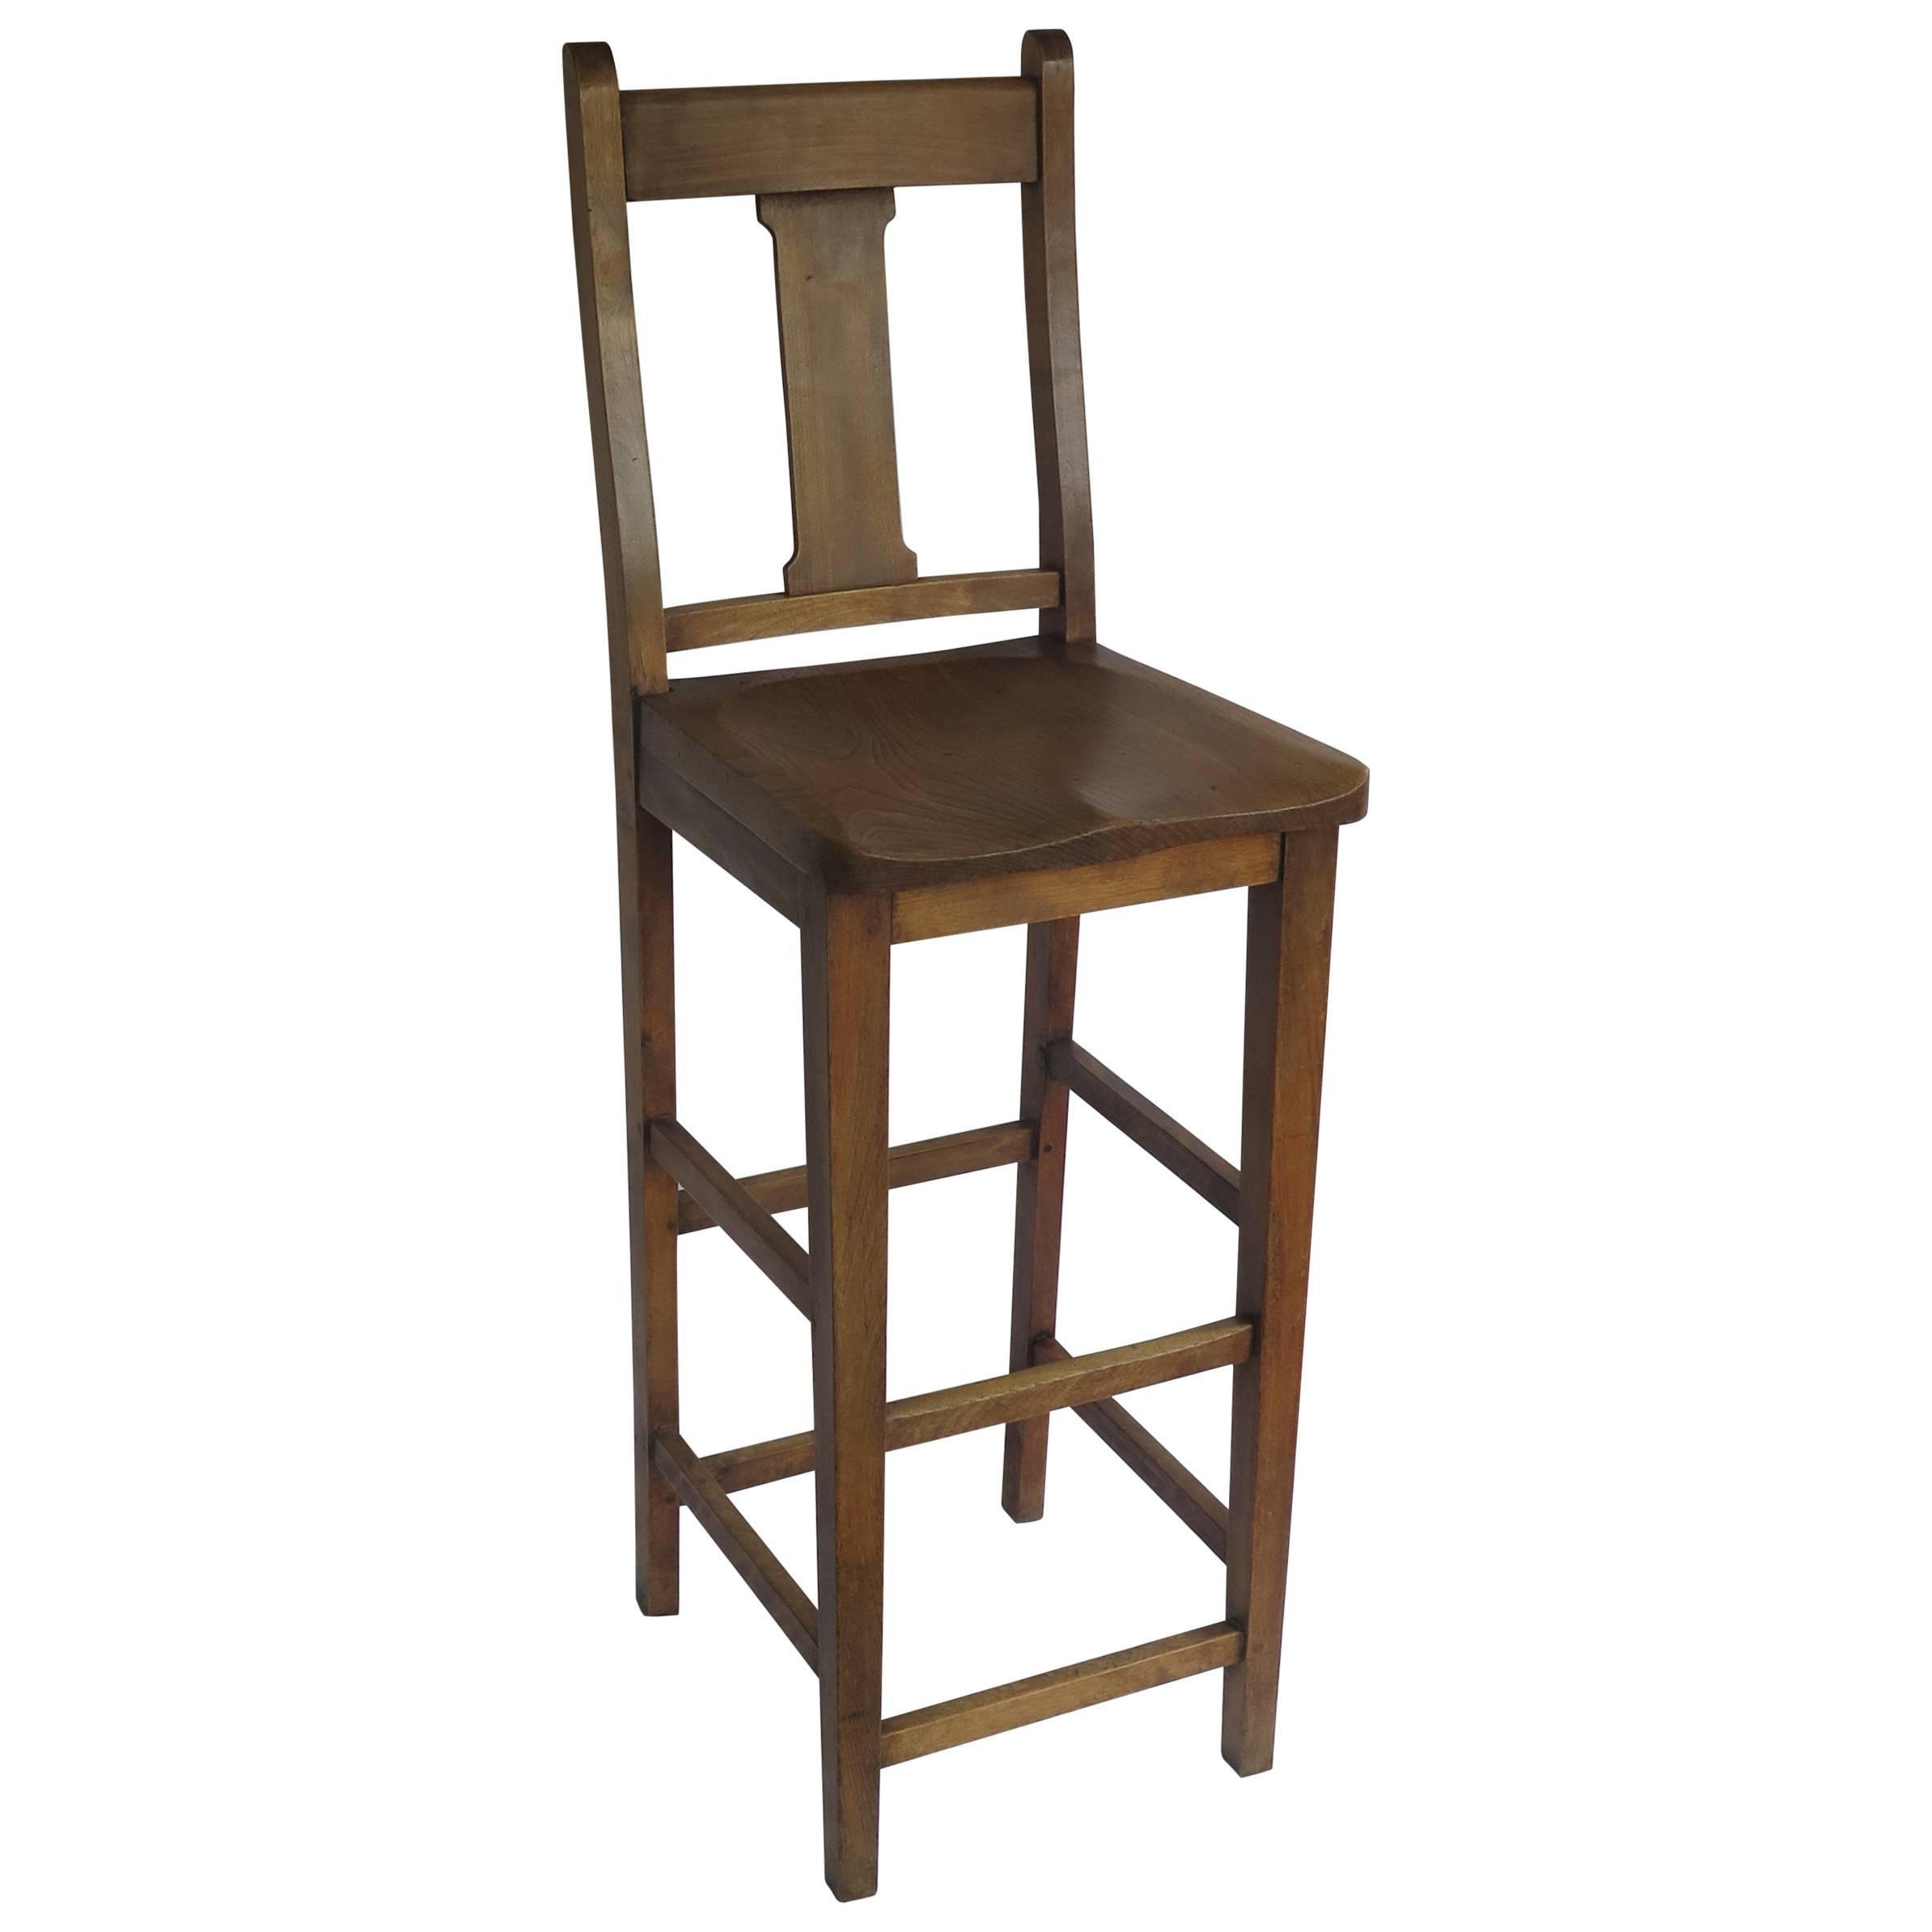 Victorian Clerk's High Chair or Kitchen Chair in Beach and Elm, English Ca. 1880 For Sale